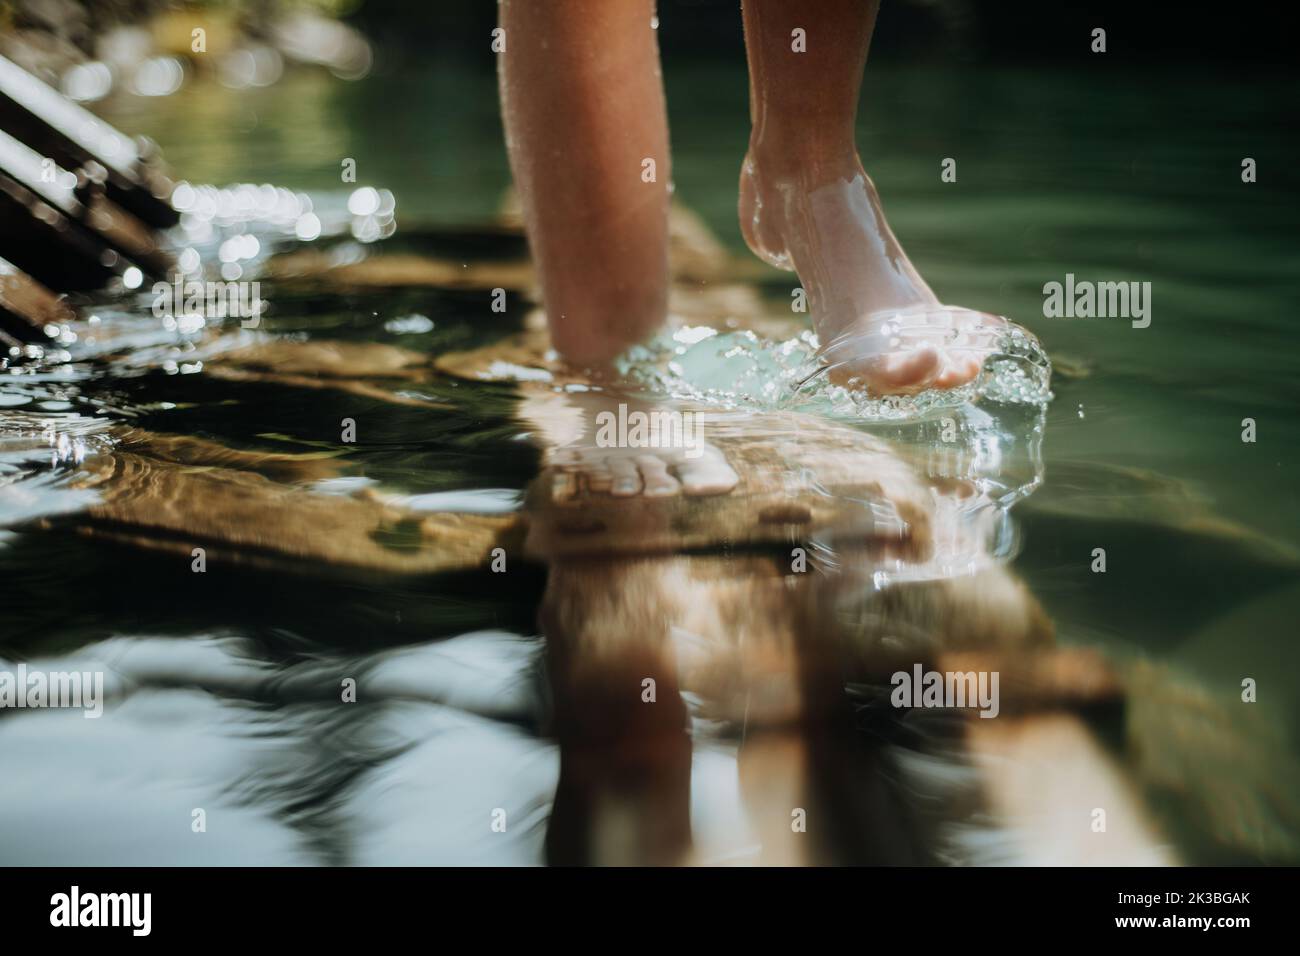 Close-up of barefoot legs walking in lake. Concept of healthy feet. Stock Photo